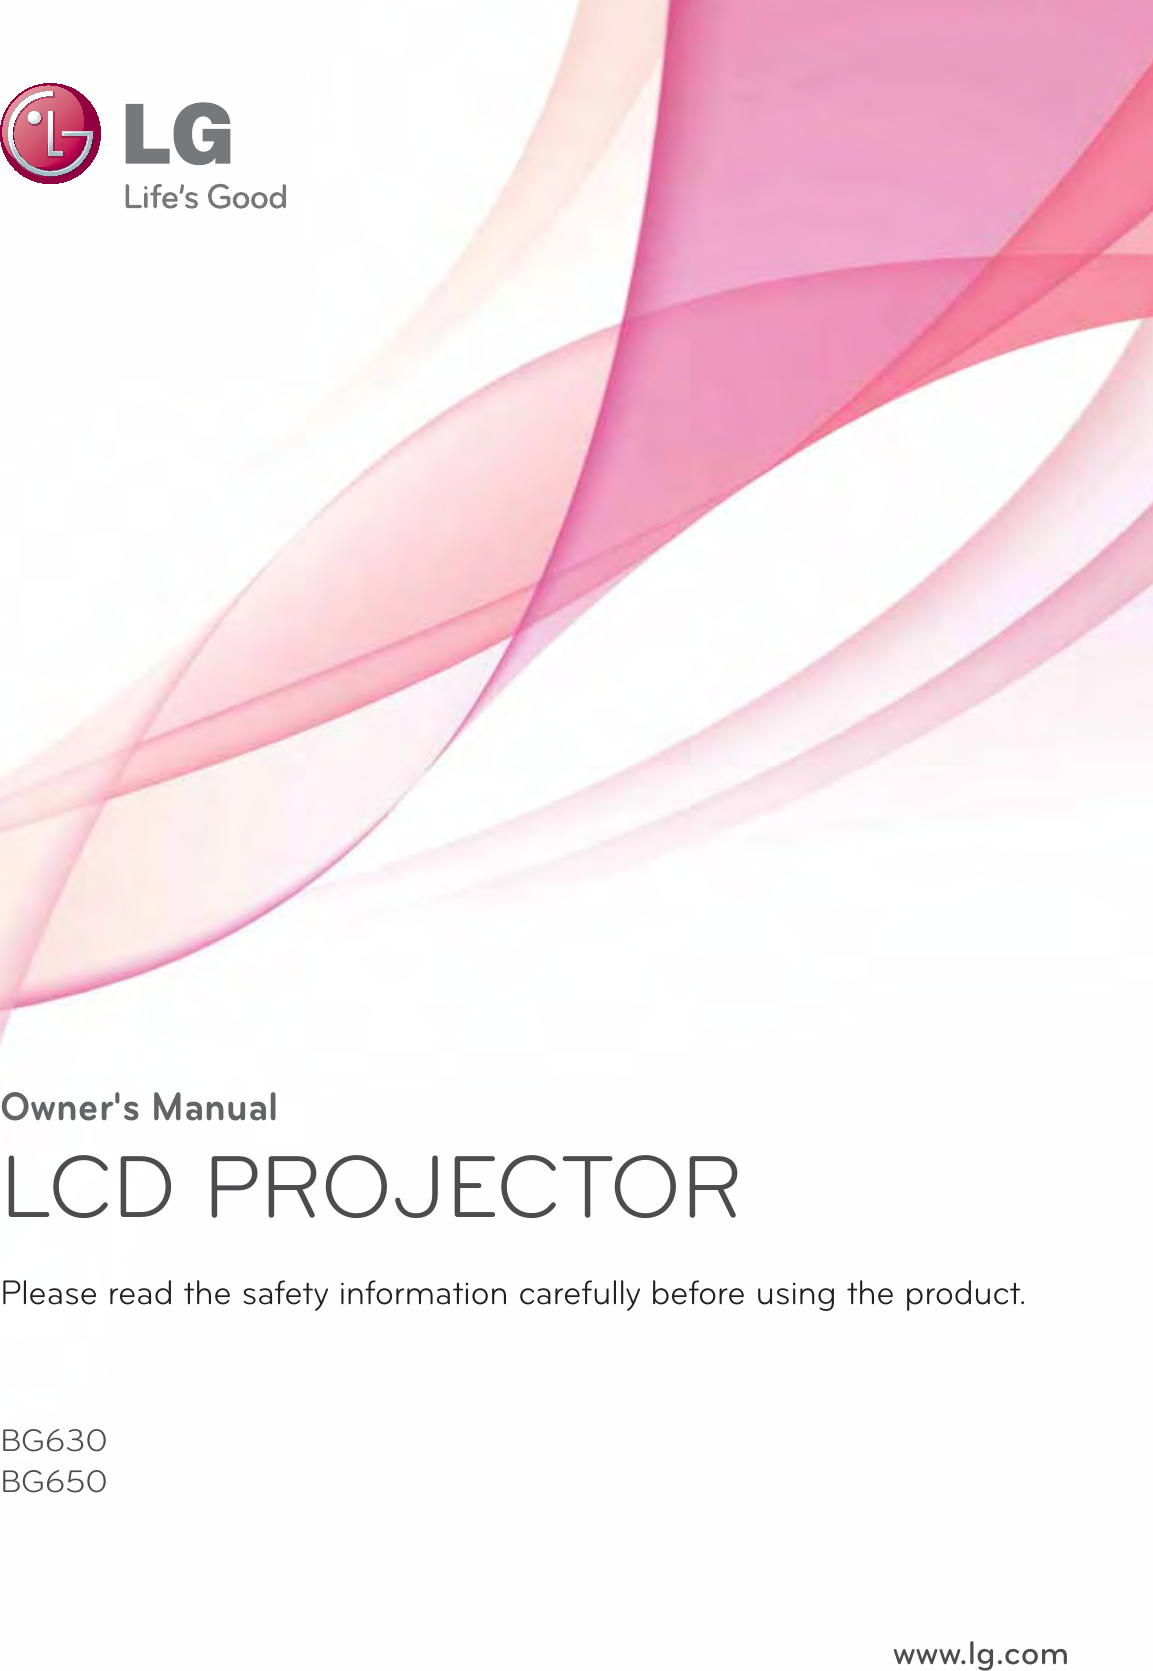 Owner&apos;s ManualLCD PROJECTORBG630BG650 Please read the safety information carefully before using the product.www.lg.com